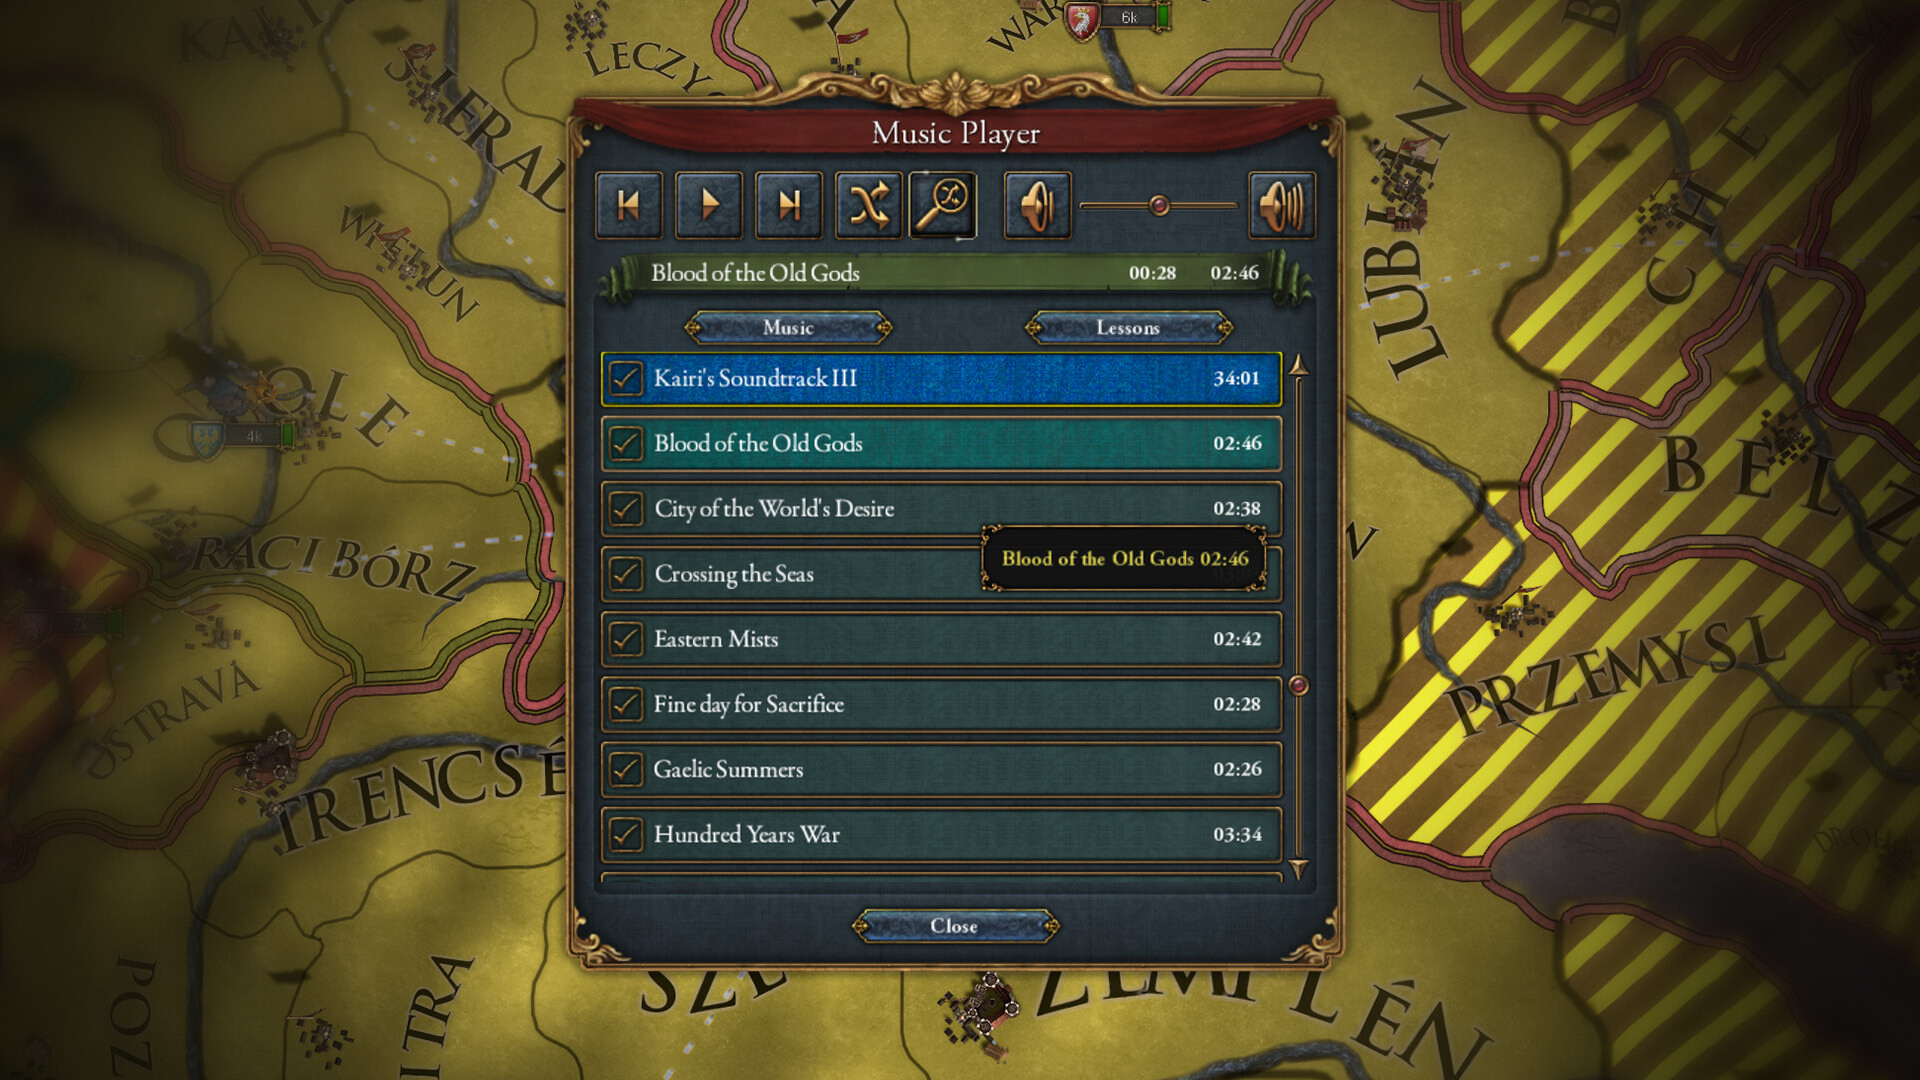 Europa Universalis IV: Sounds from the Community - Kairi Soundtrack Part III Featured Screenshot #1